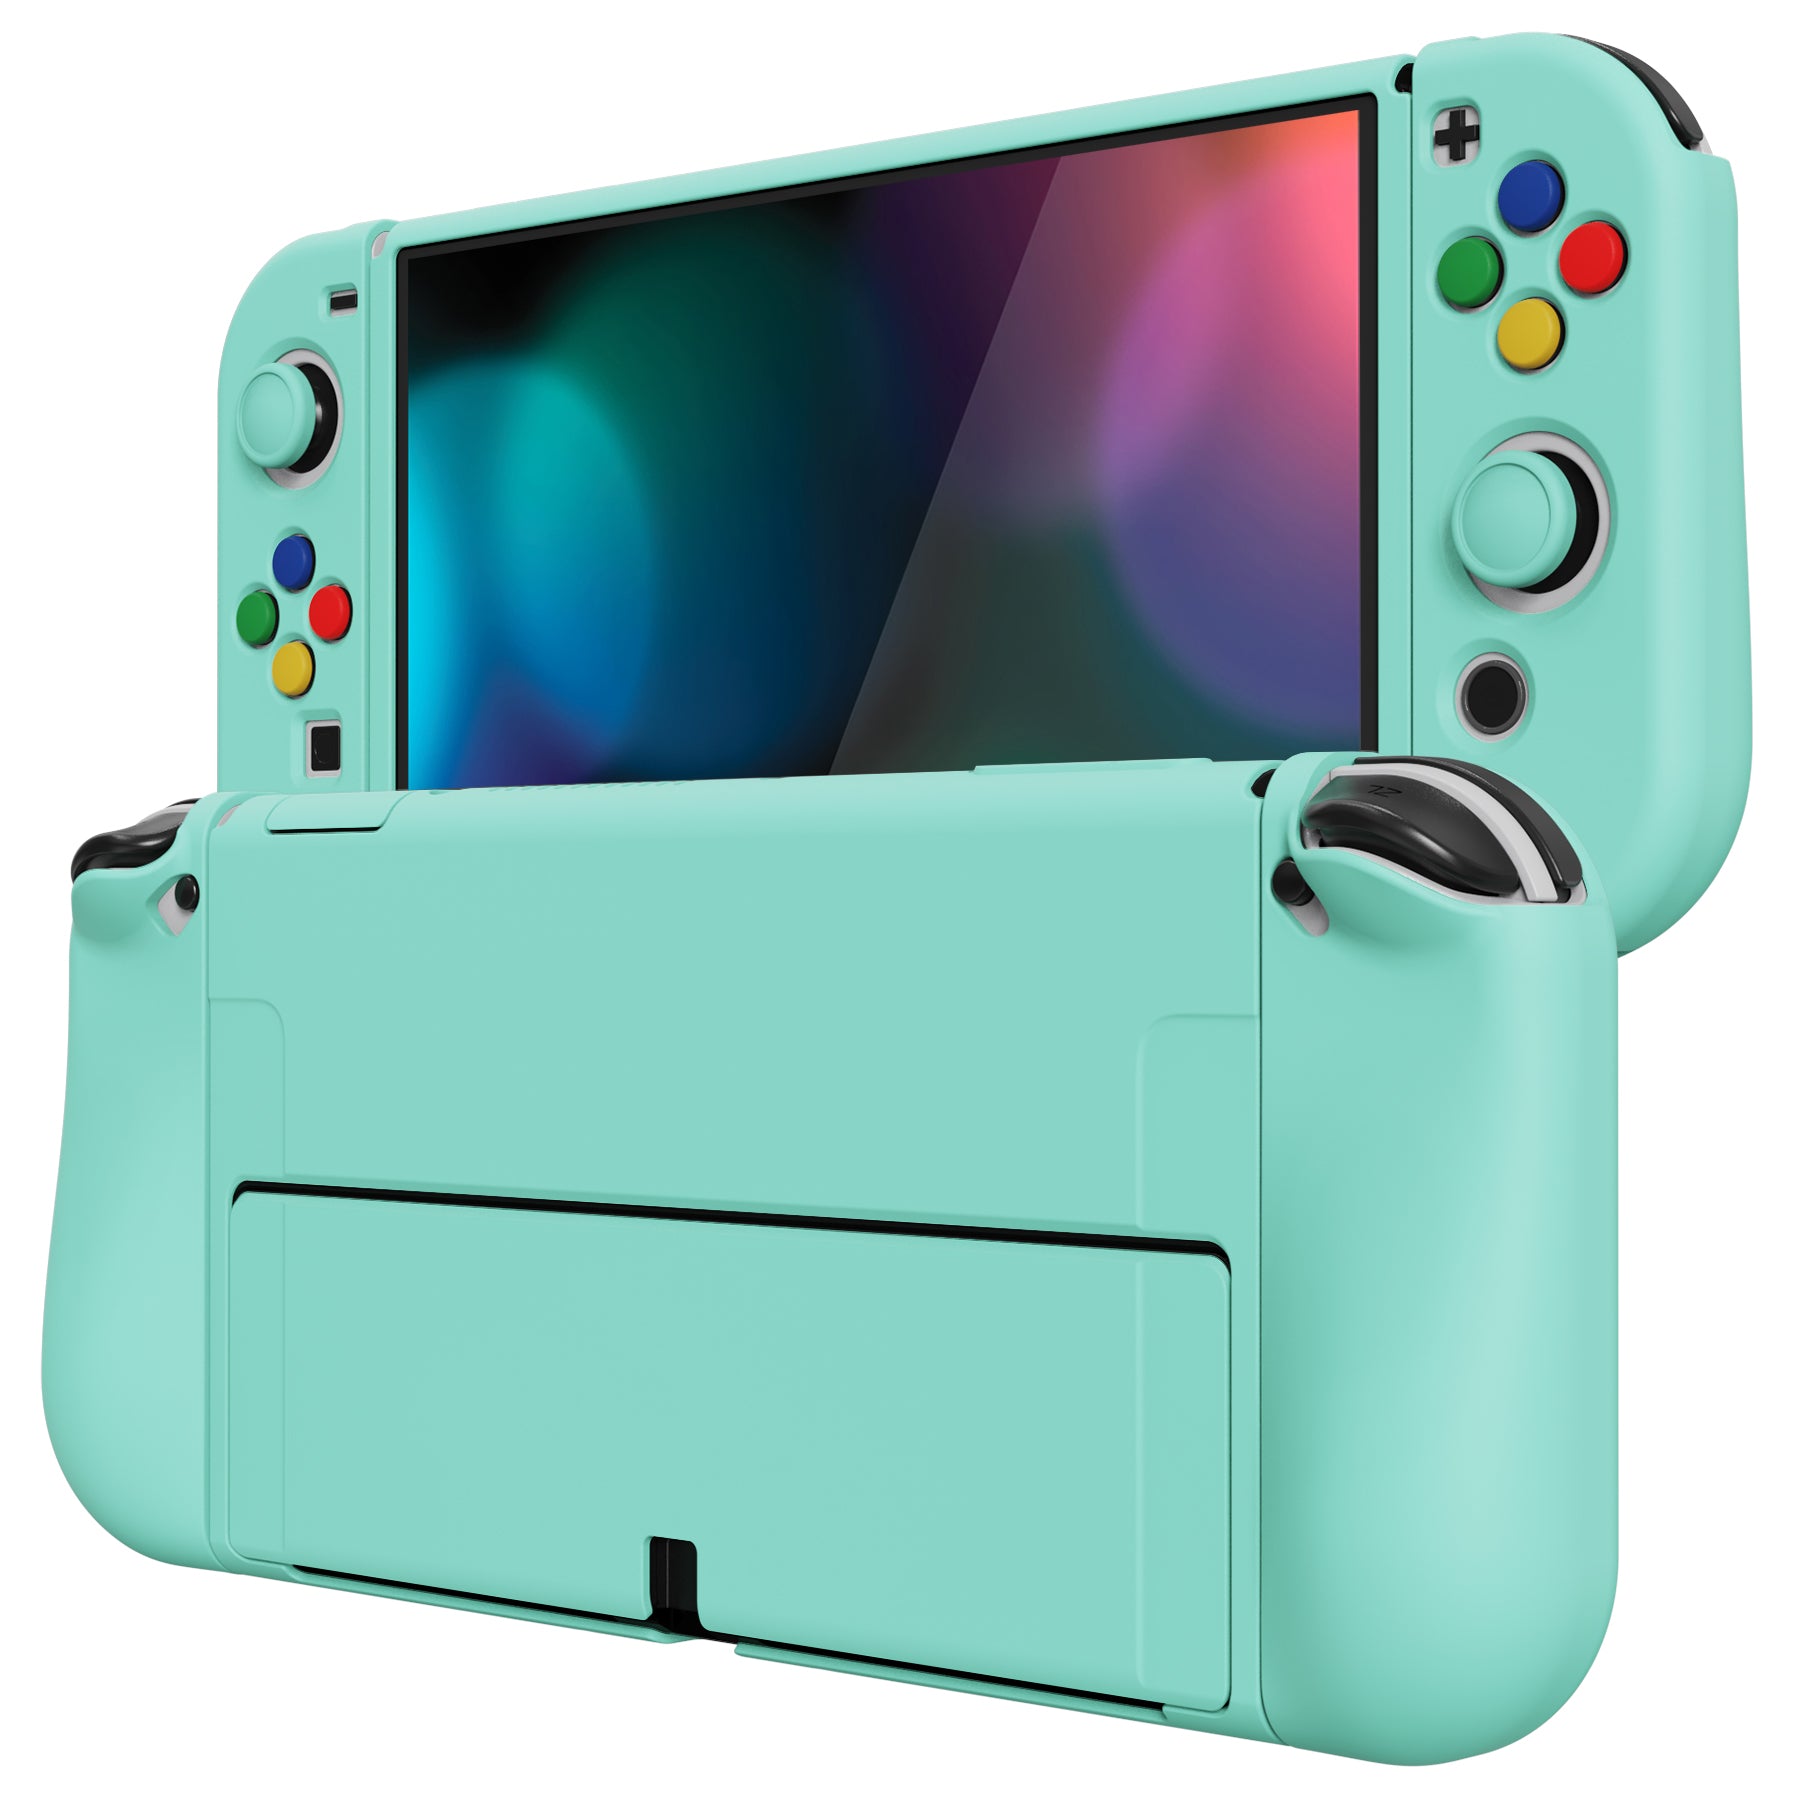 Tomtoc Nintendo Switch Oled 2021 Case is enough for Asus Rog Ally